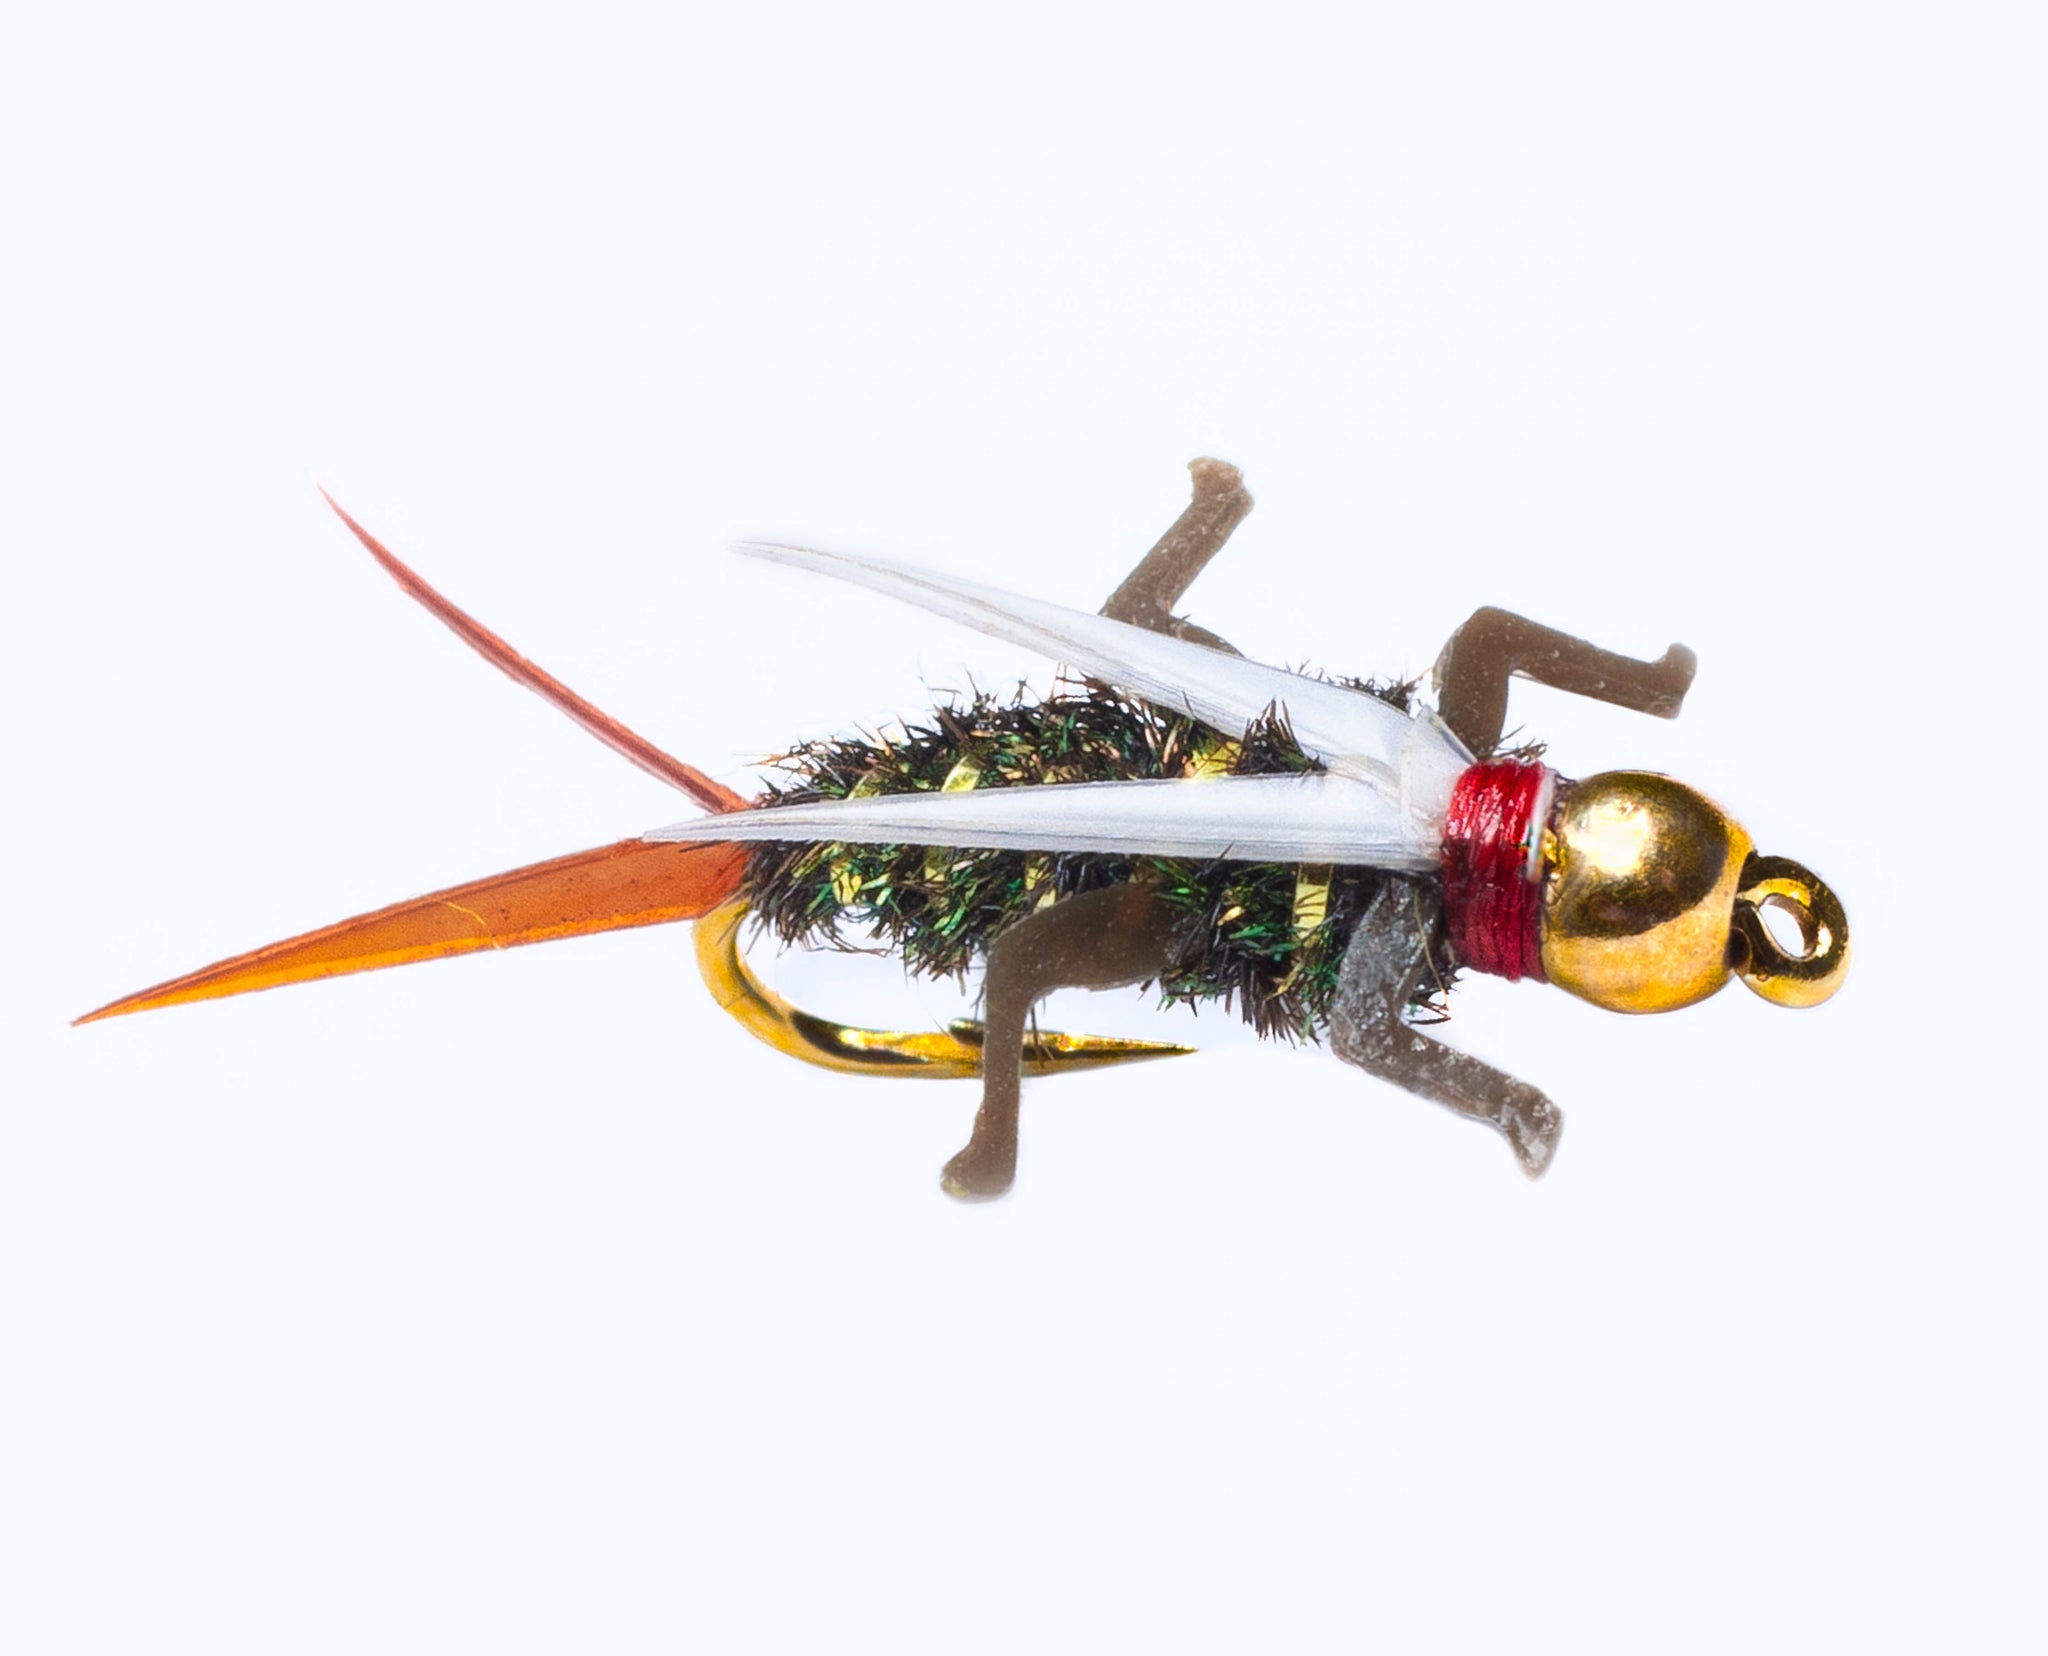 Lively Legz Zinger (Retractor) – Lively Legz Fly Fishing